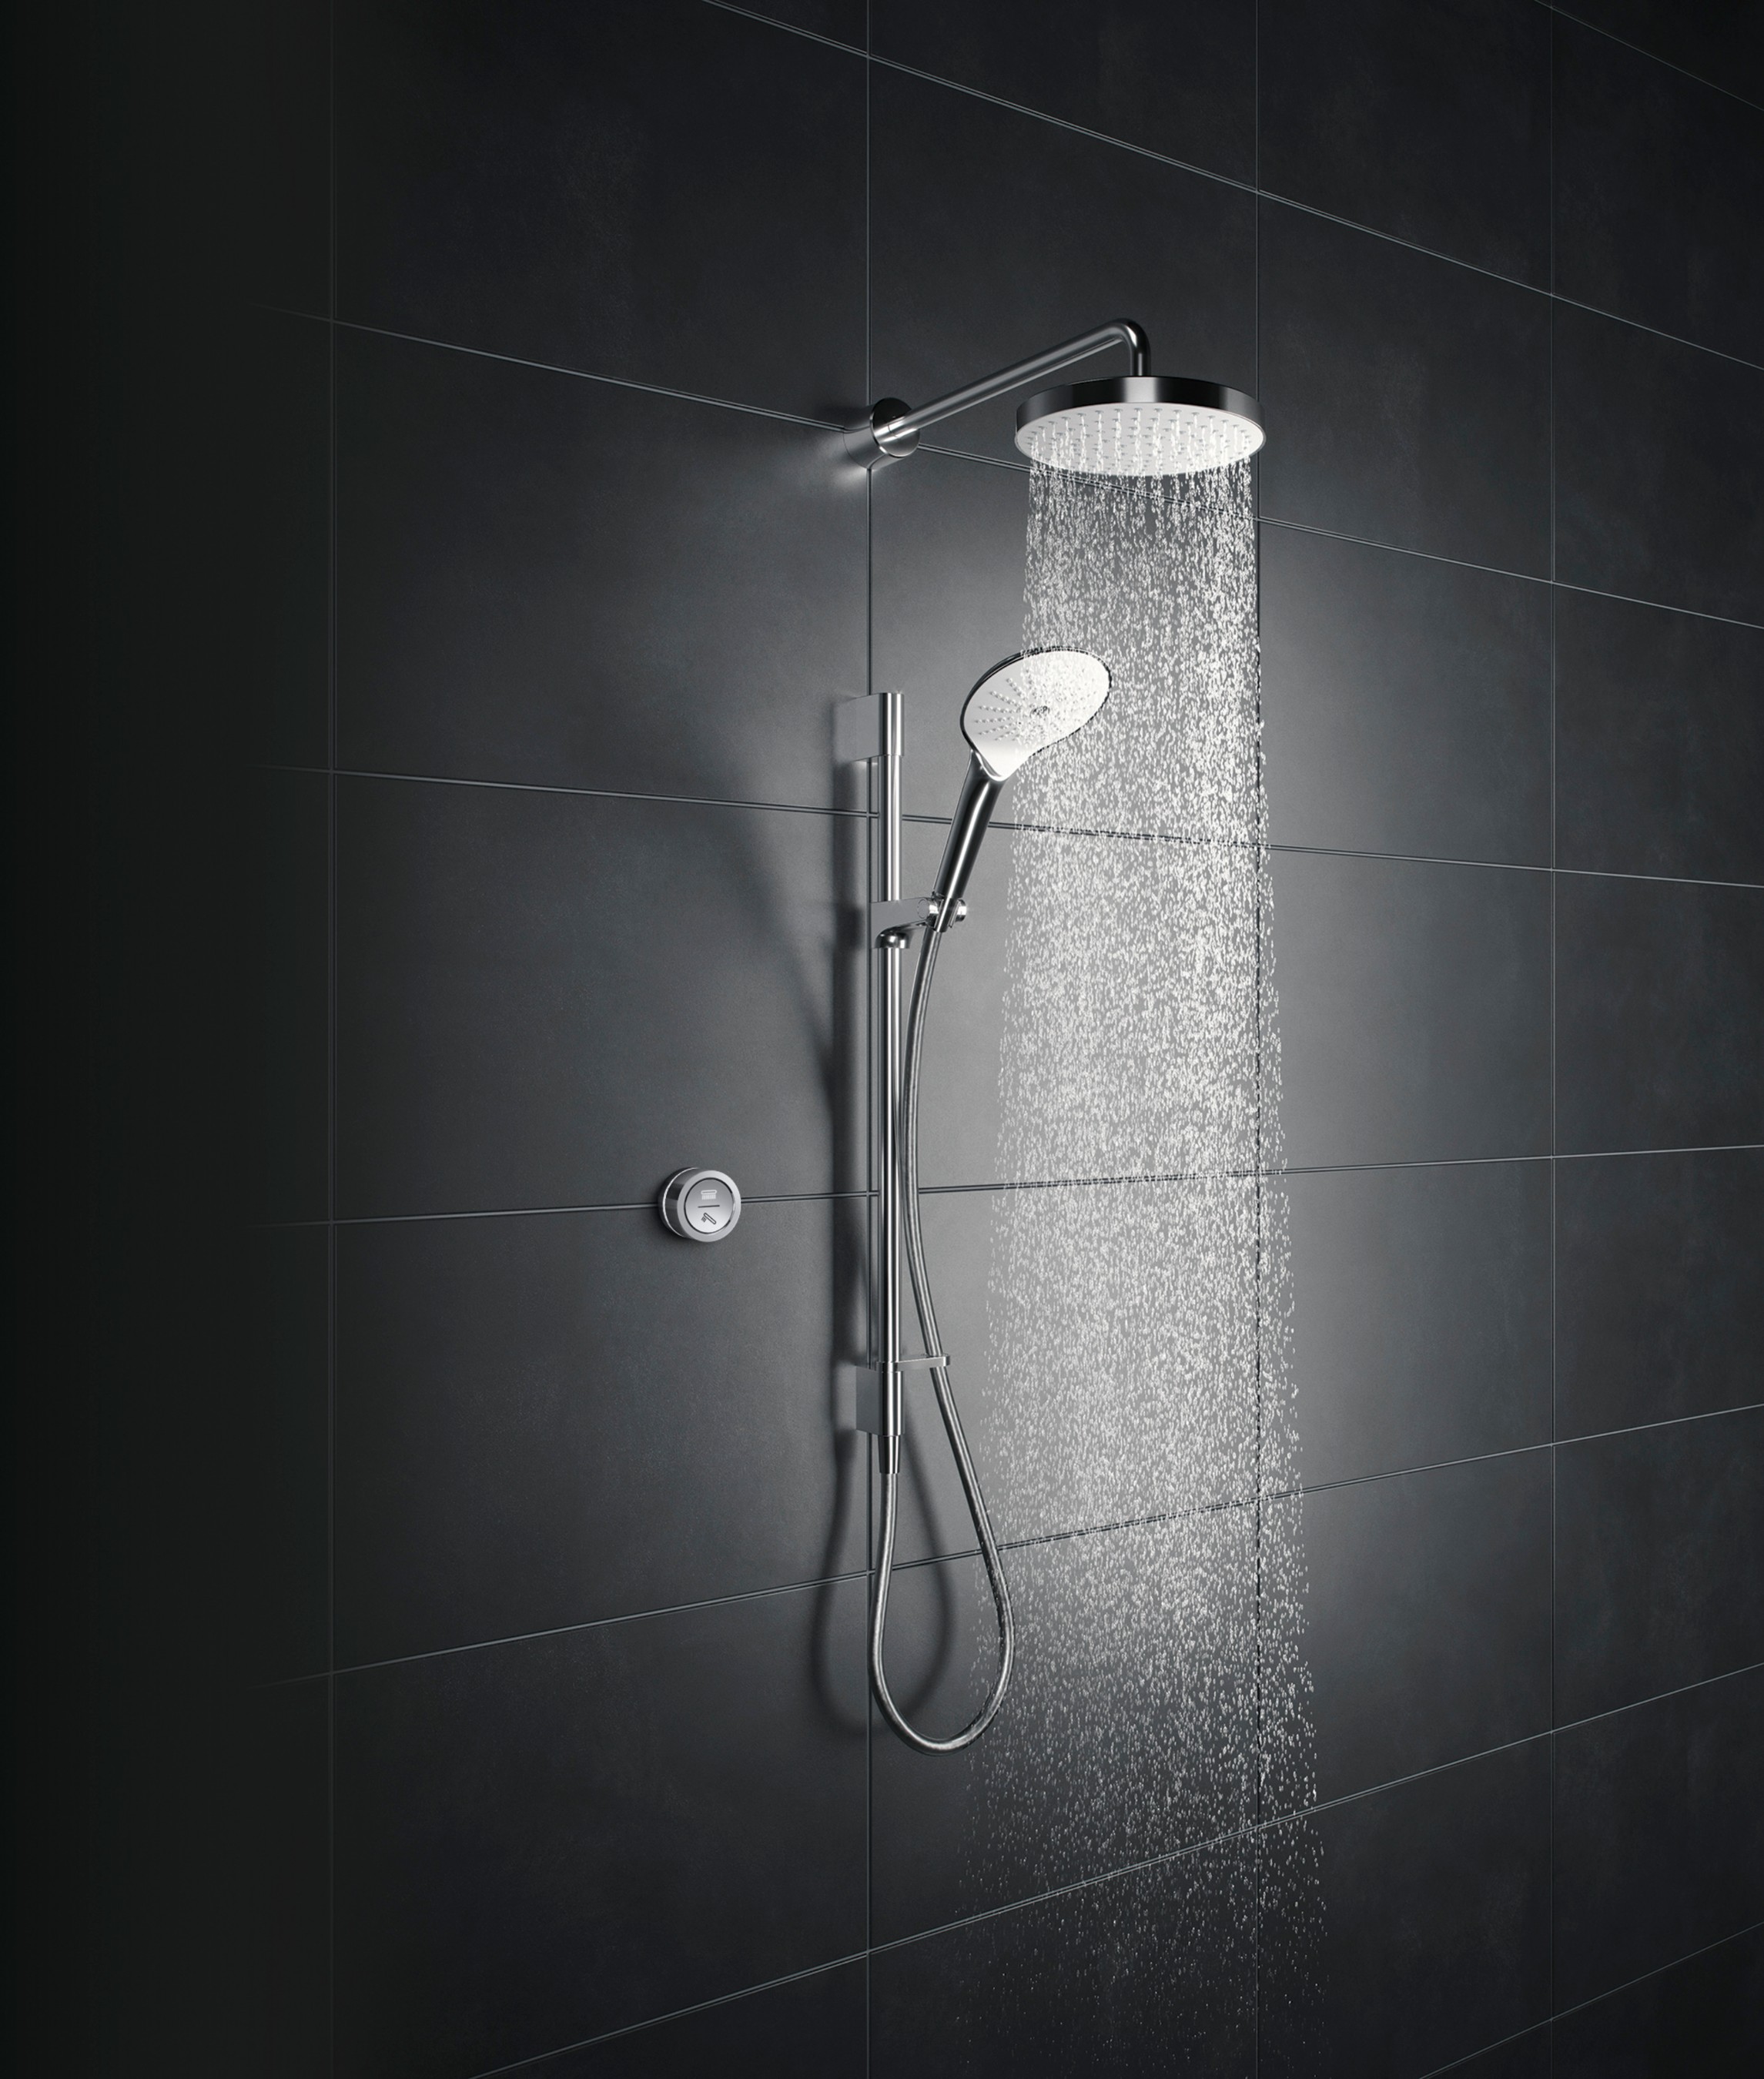 KOHLER DTV Mode provides a simple push-button control of Kohler’s industry leading digital shower with an integrated temperature dial.